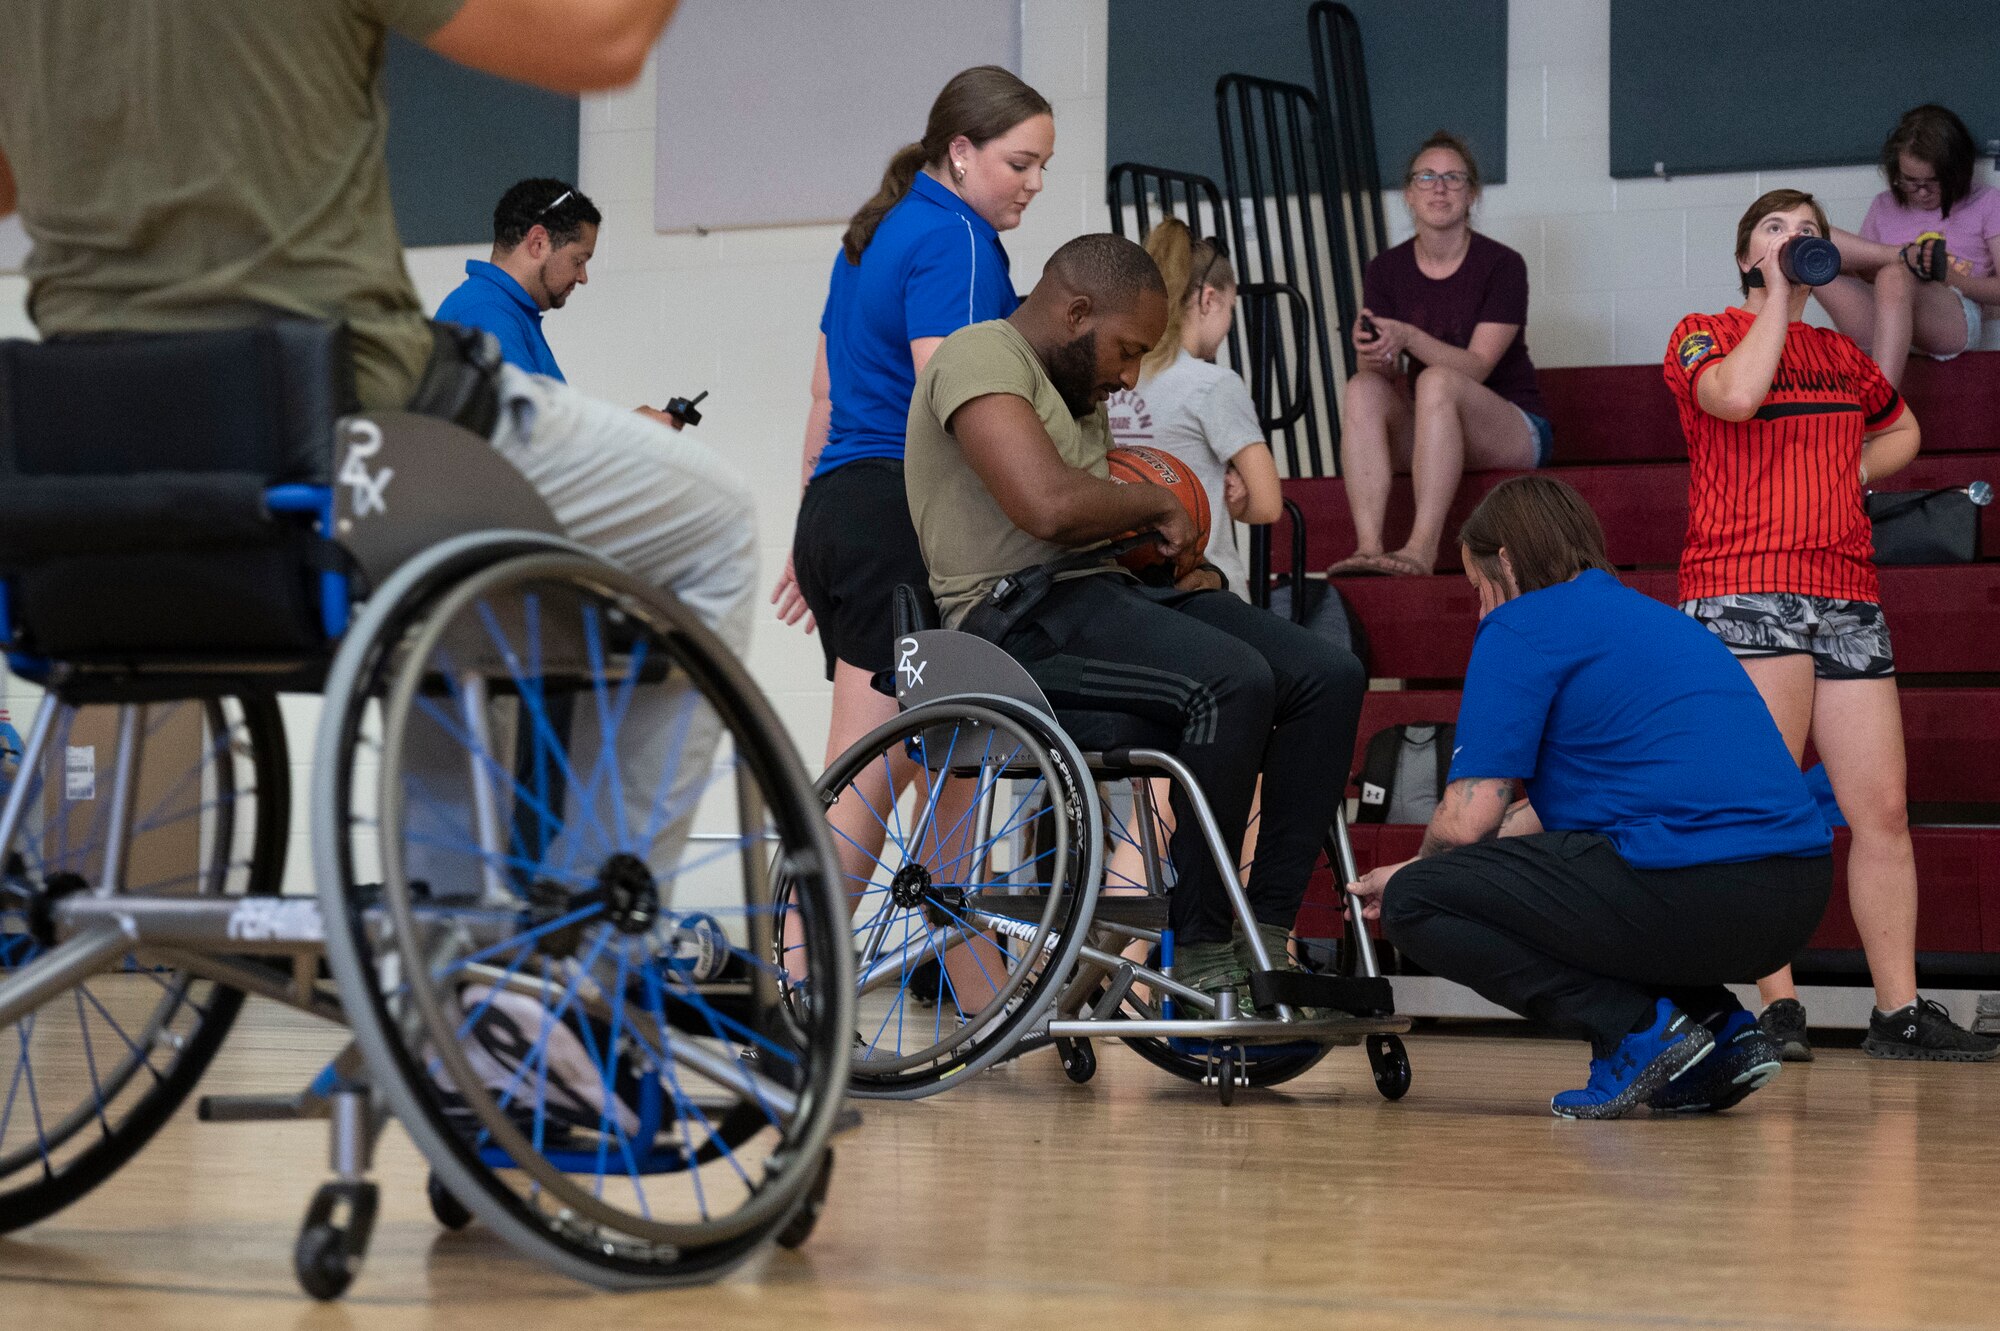 U.S. Airmen prepare to try modified basketball with the help of several Air Force Wounded Warrior
Program (AFW2) members at Laughlin Air Force Base, Texas, June 15, 2022. The AFW2 Program is a
Congressionally-mandated and Federally-funded organization tasked with taking care of U.S. Air Force
wounded, ill, and injured Airmen, Veterans, and their families. (U.S. Air Force photo by Airman 1st Class
Kailee Reynolds)